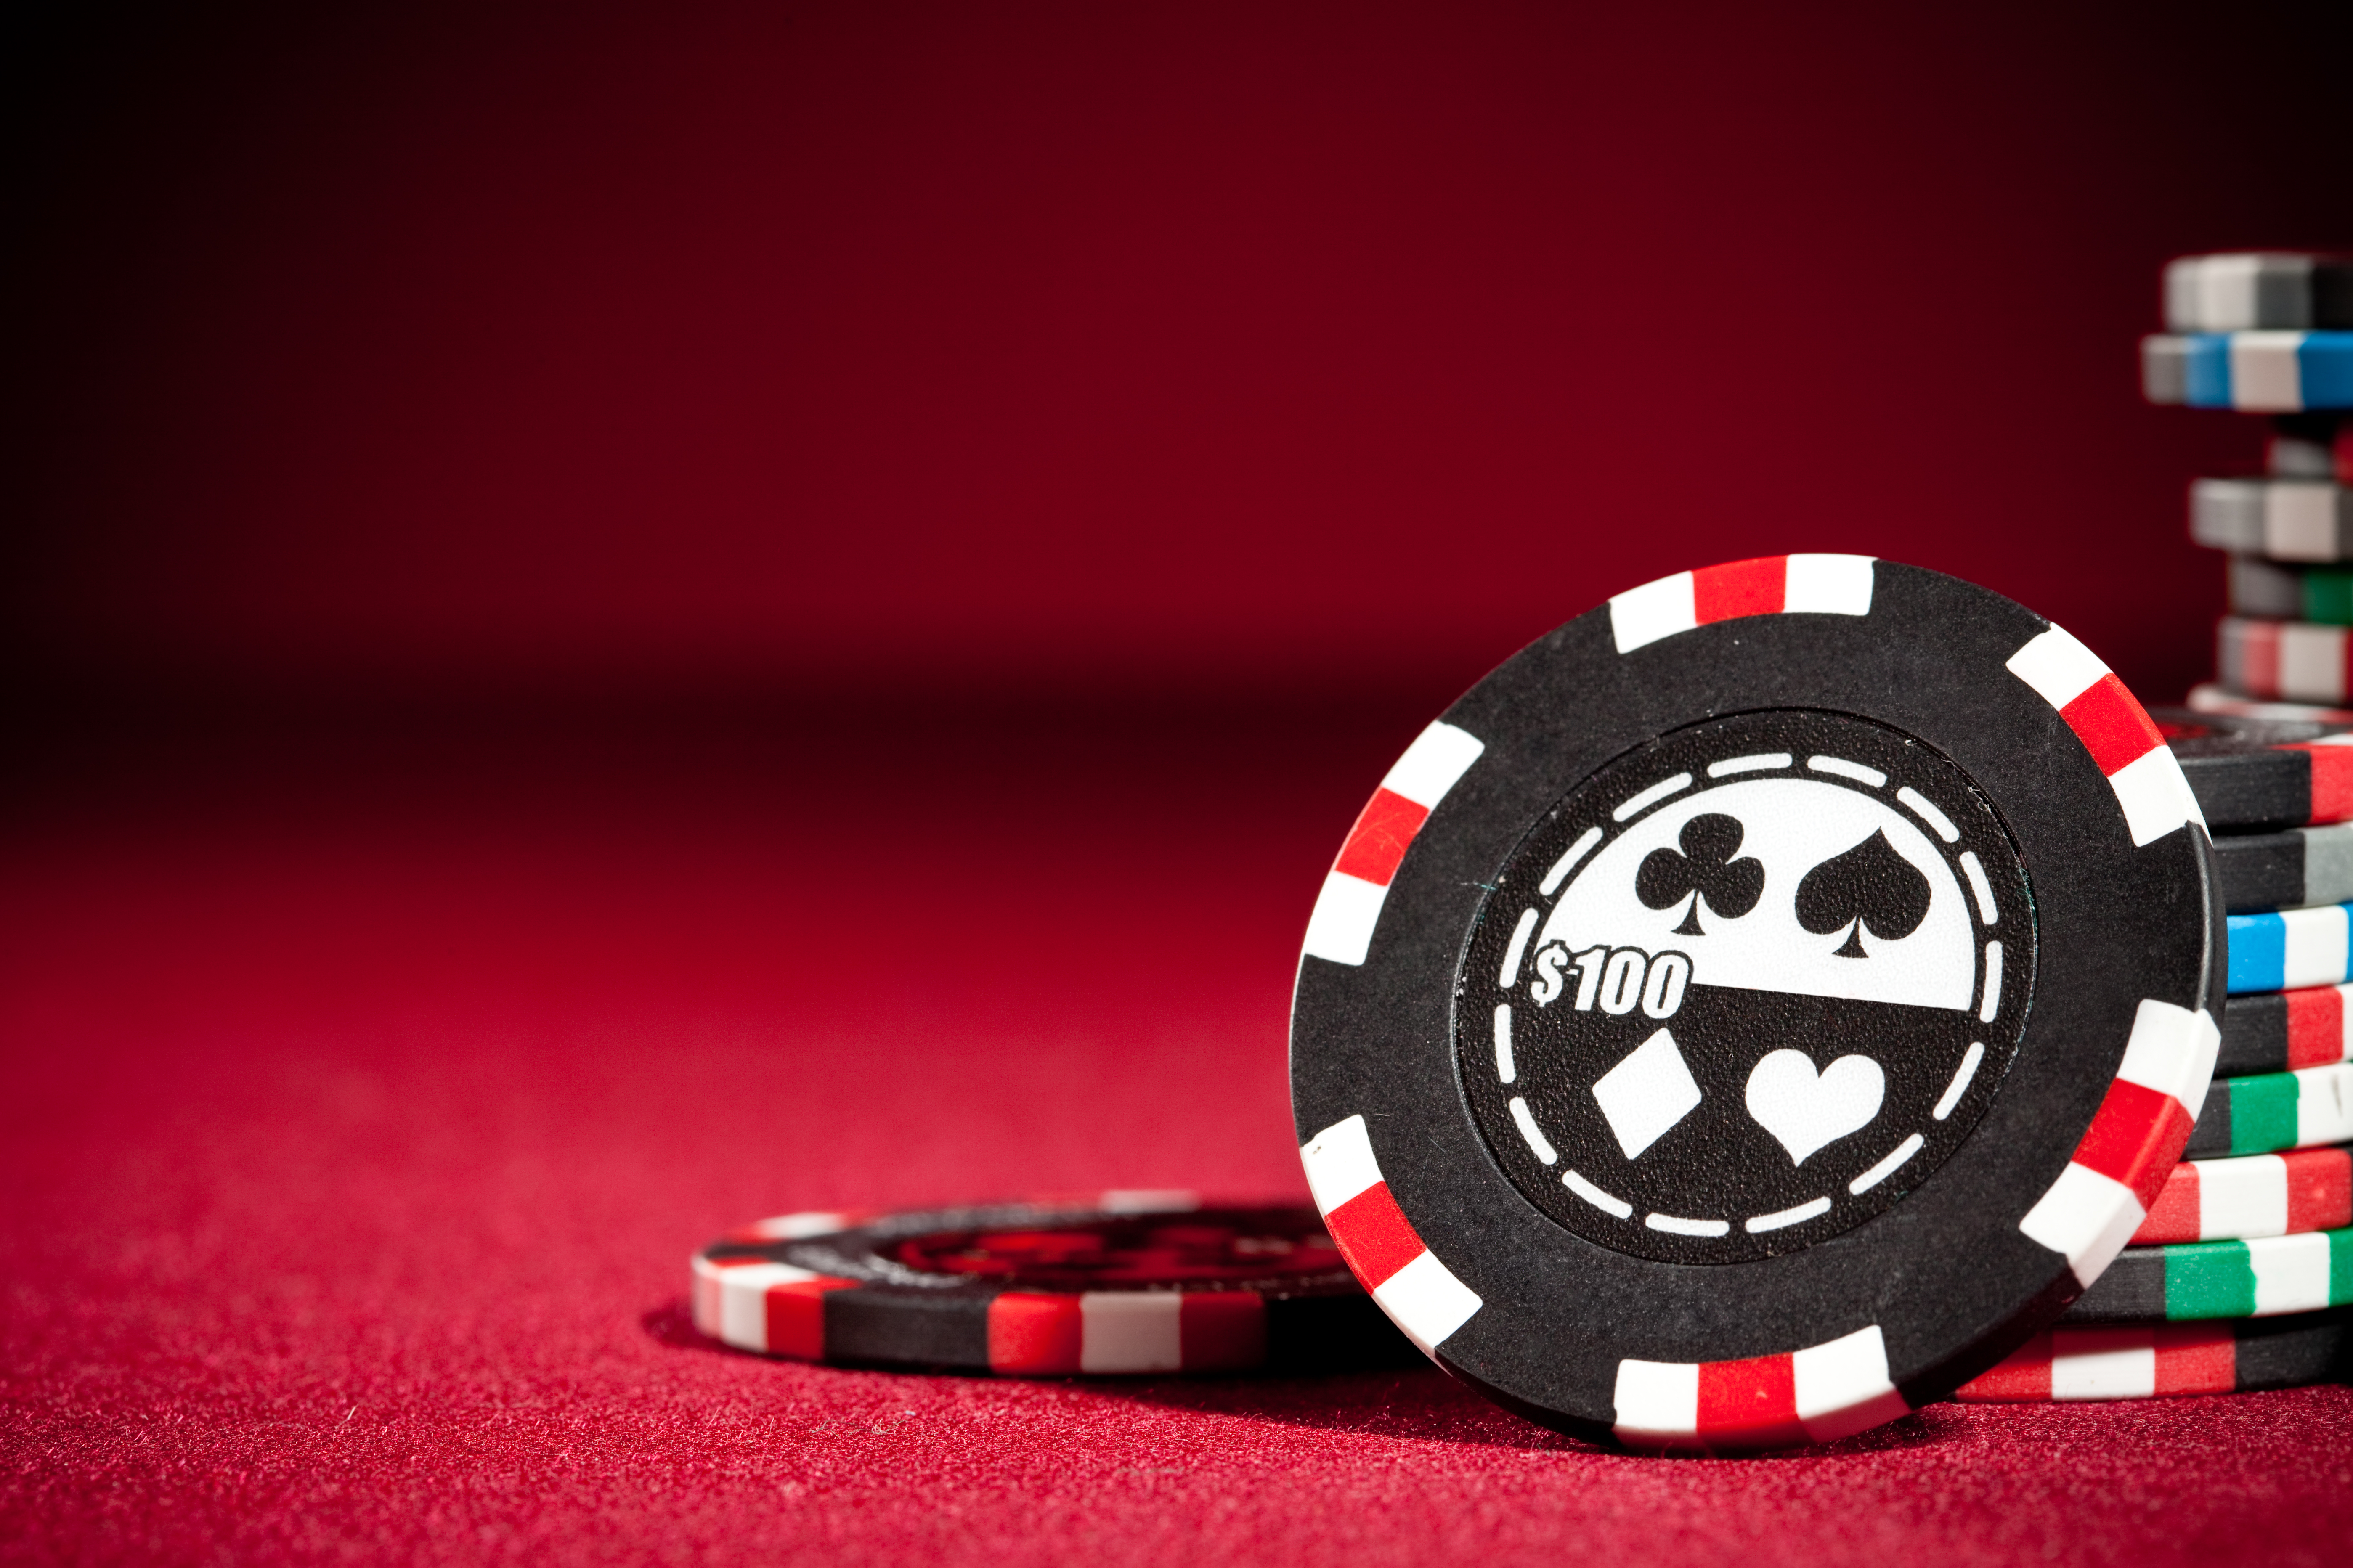 Photo casino poker chips 100 picture on Fonwall